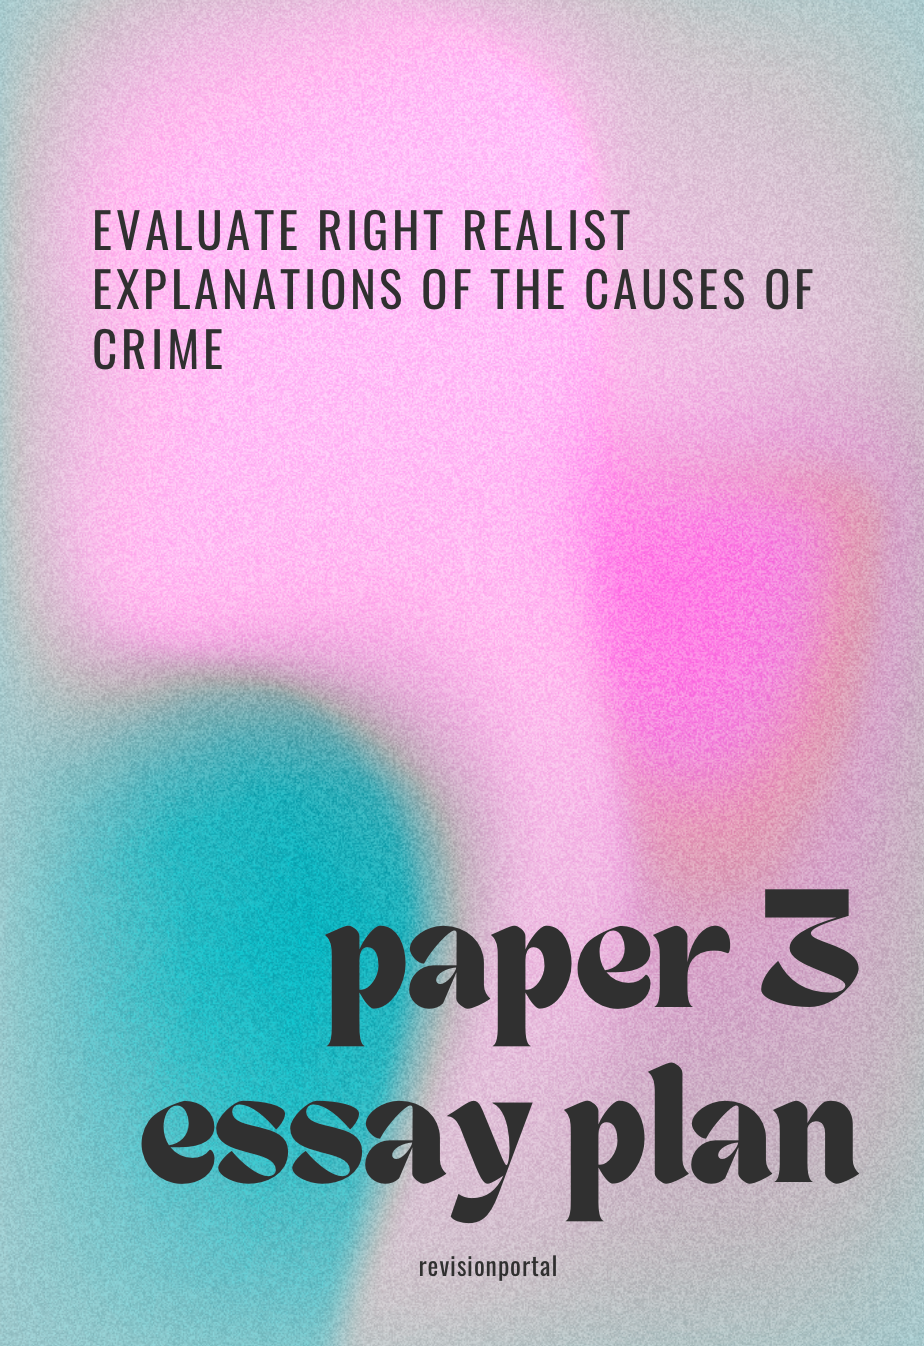 A* sociology essay plan - Evaluate right realist explanations of the causes of crime